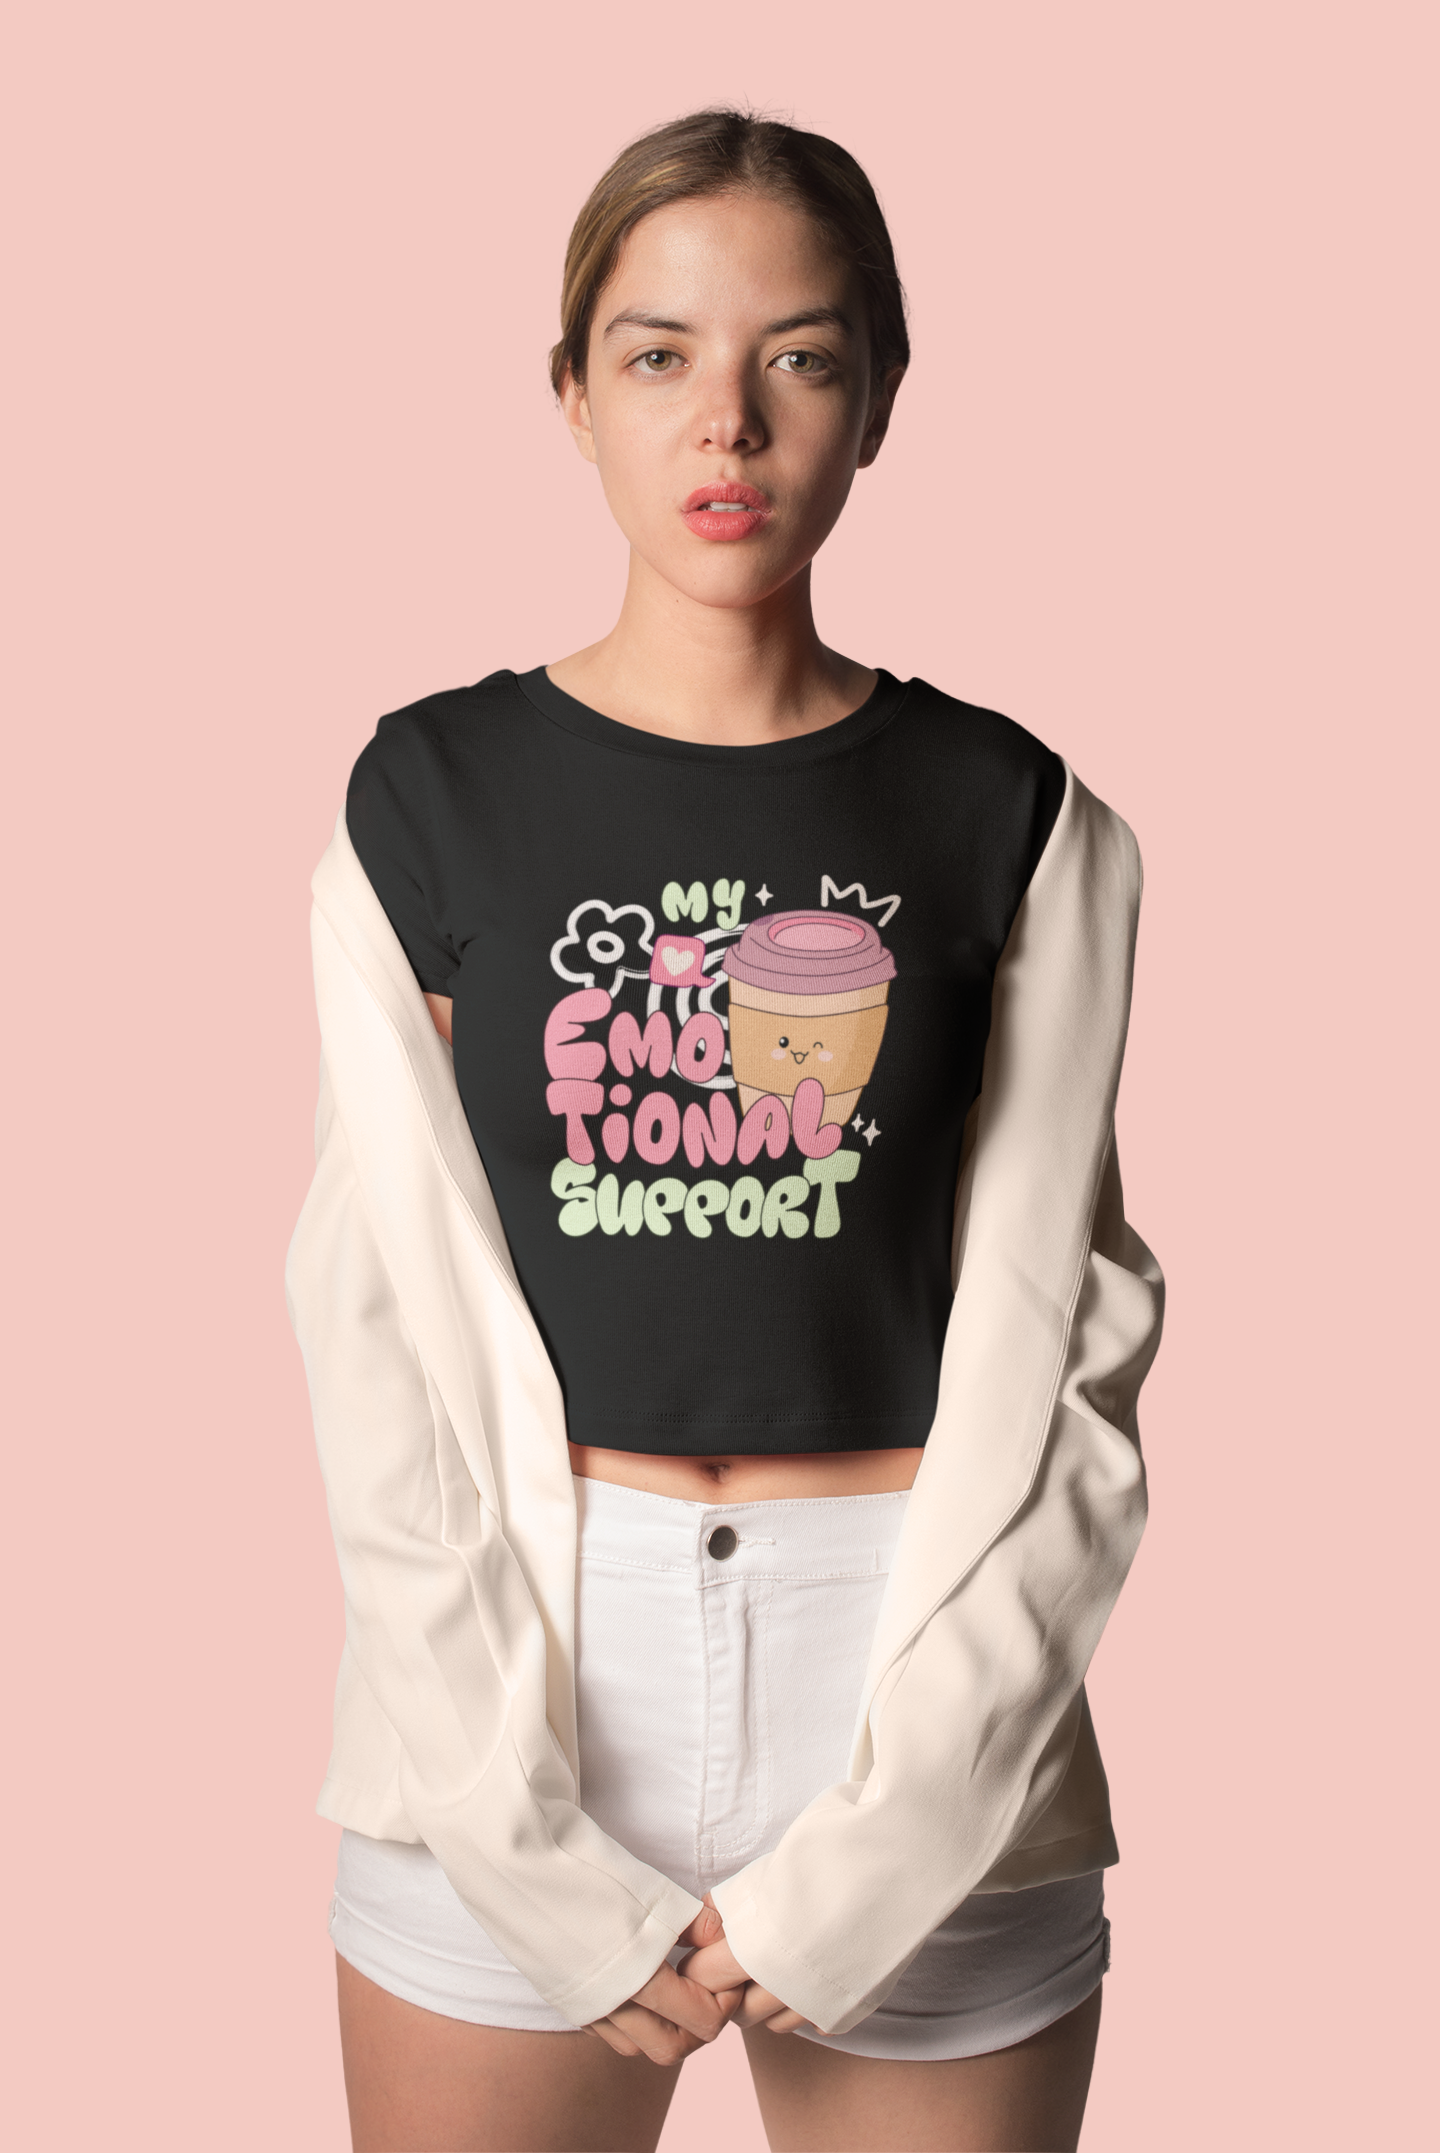 My Emotional Support Coffee Crop Top by Cute Stuff Co. 180 GSM